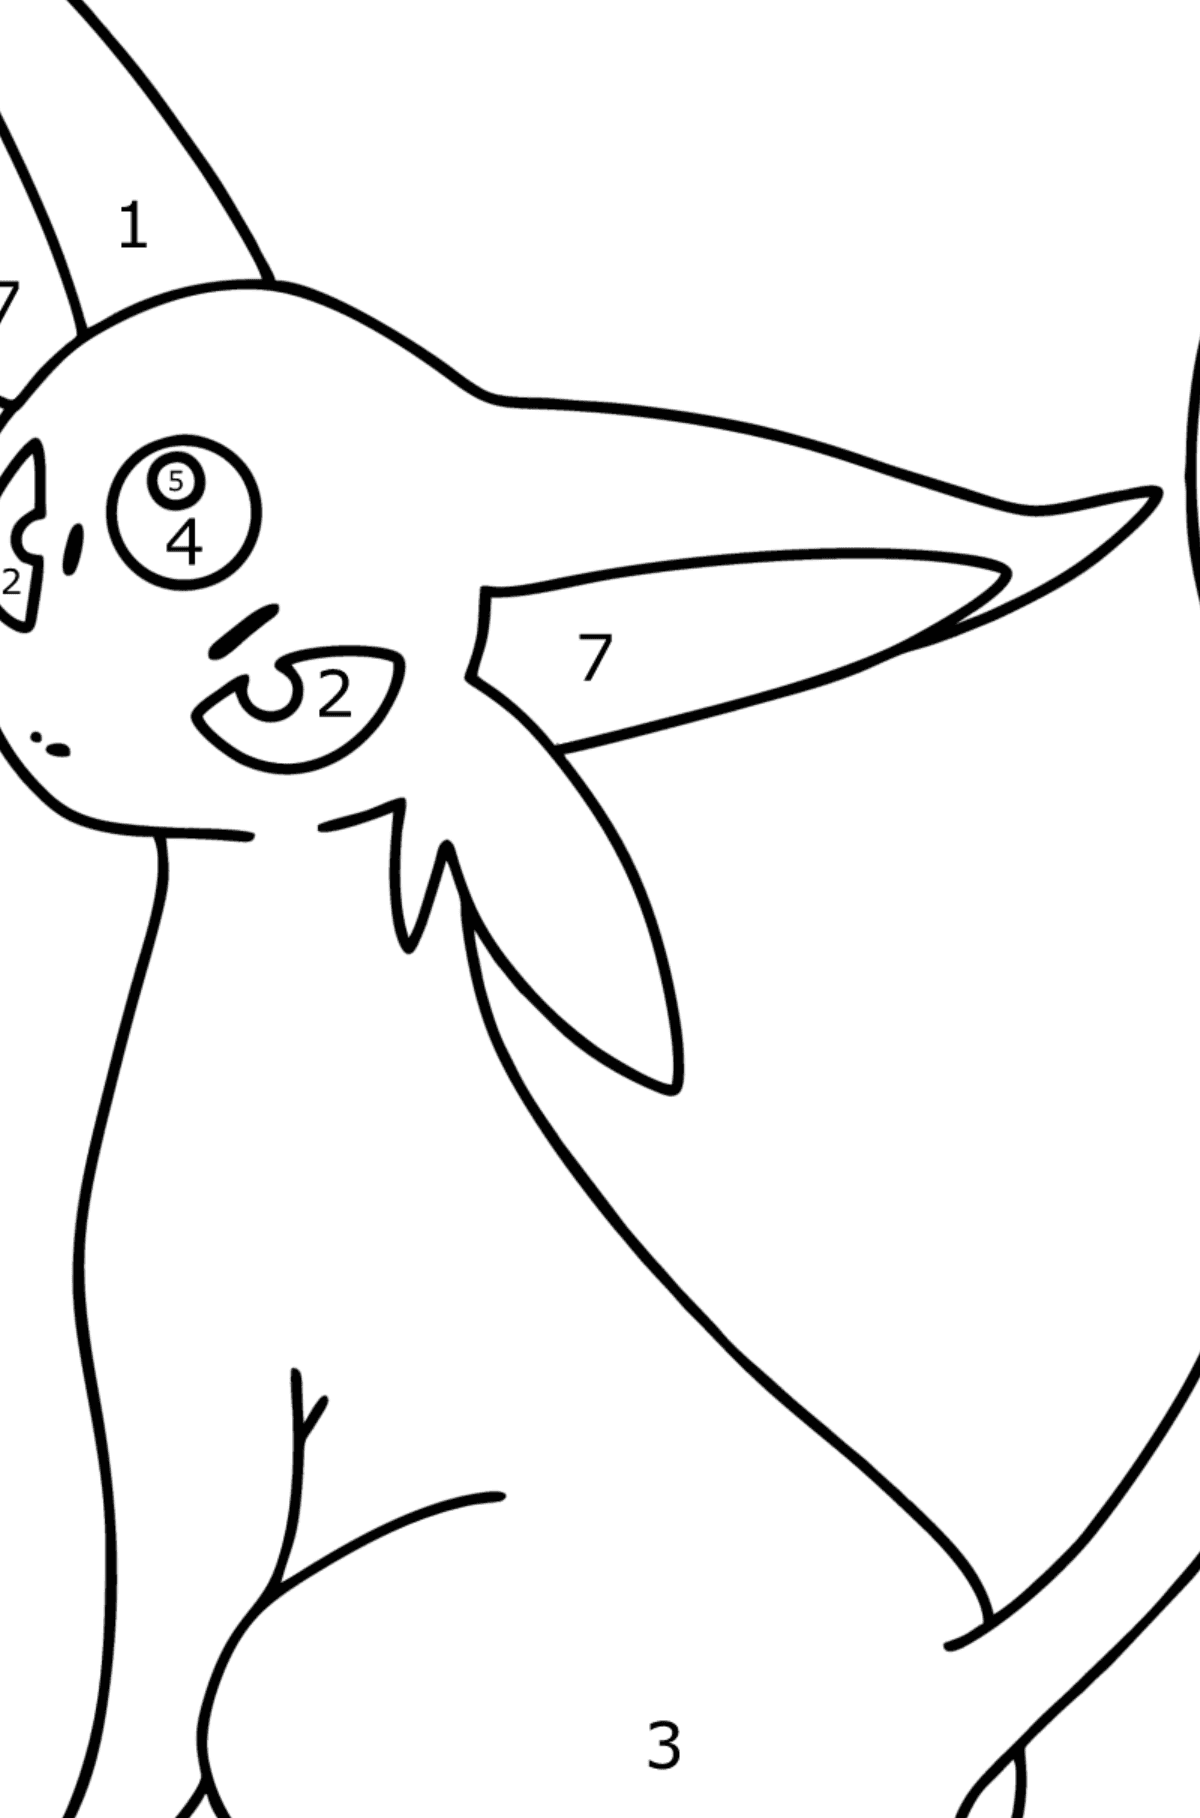 Pokemon Go Espeon coloring page - Coloring by Numbers for Kids